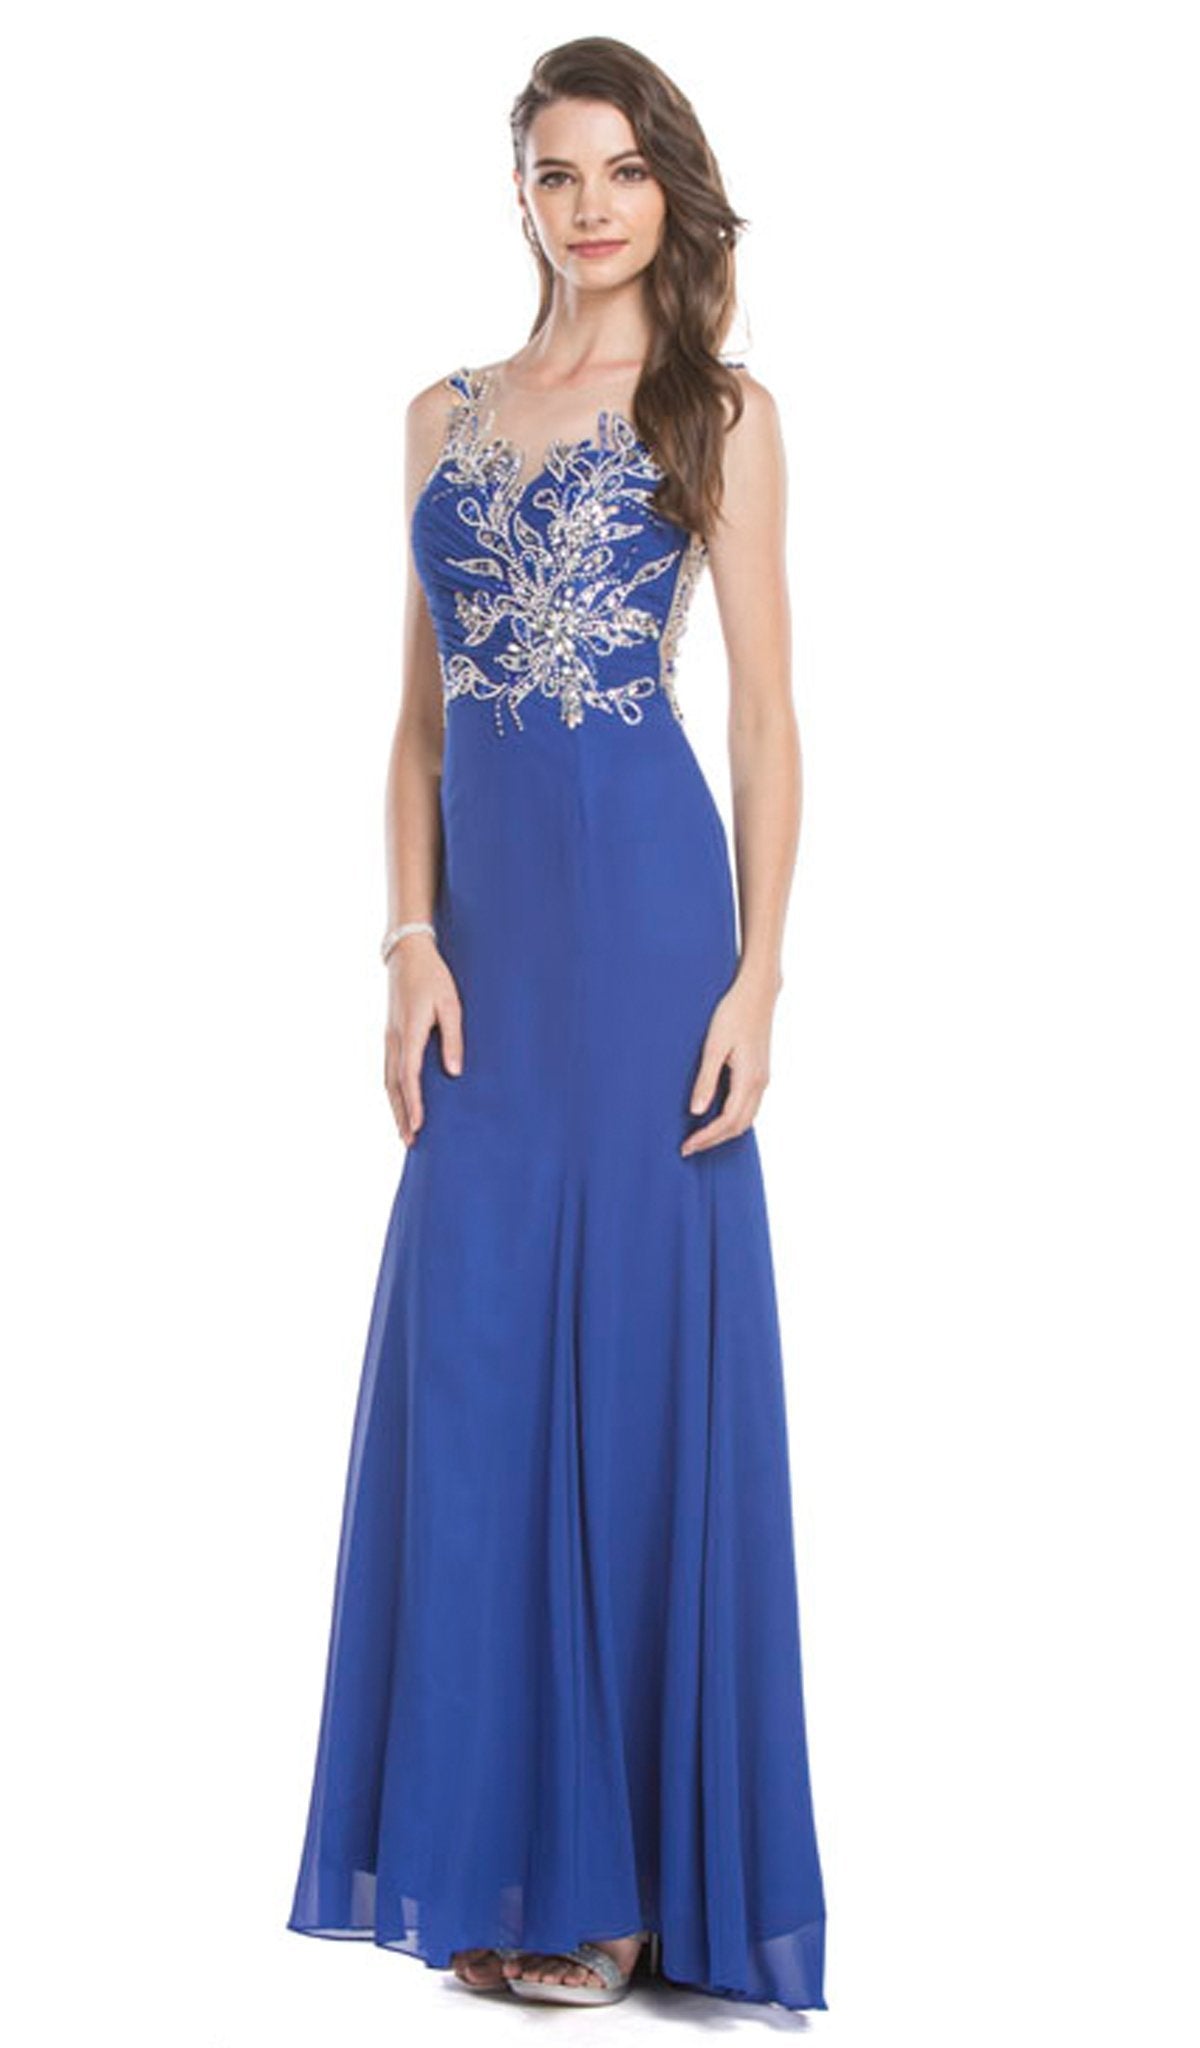 Aspeed Design - Sheer Sleeveless Affordable Prom Gown
